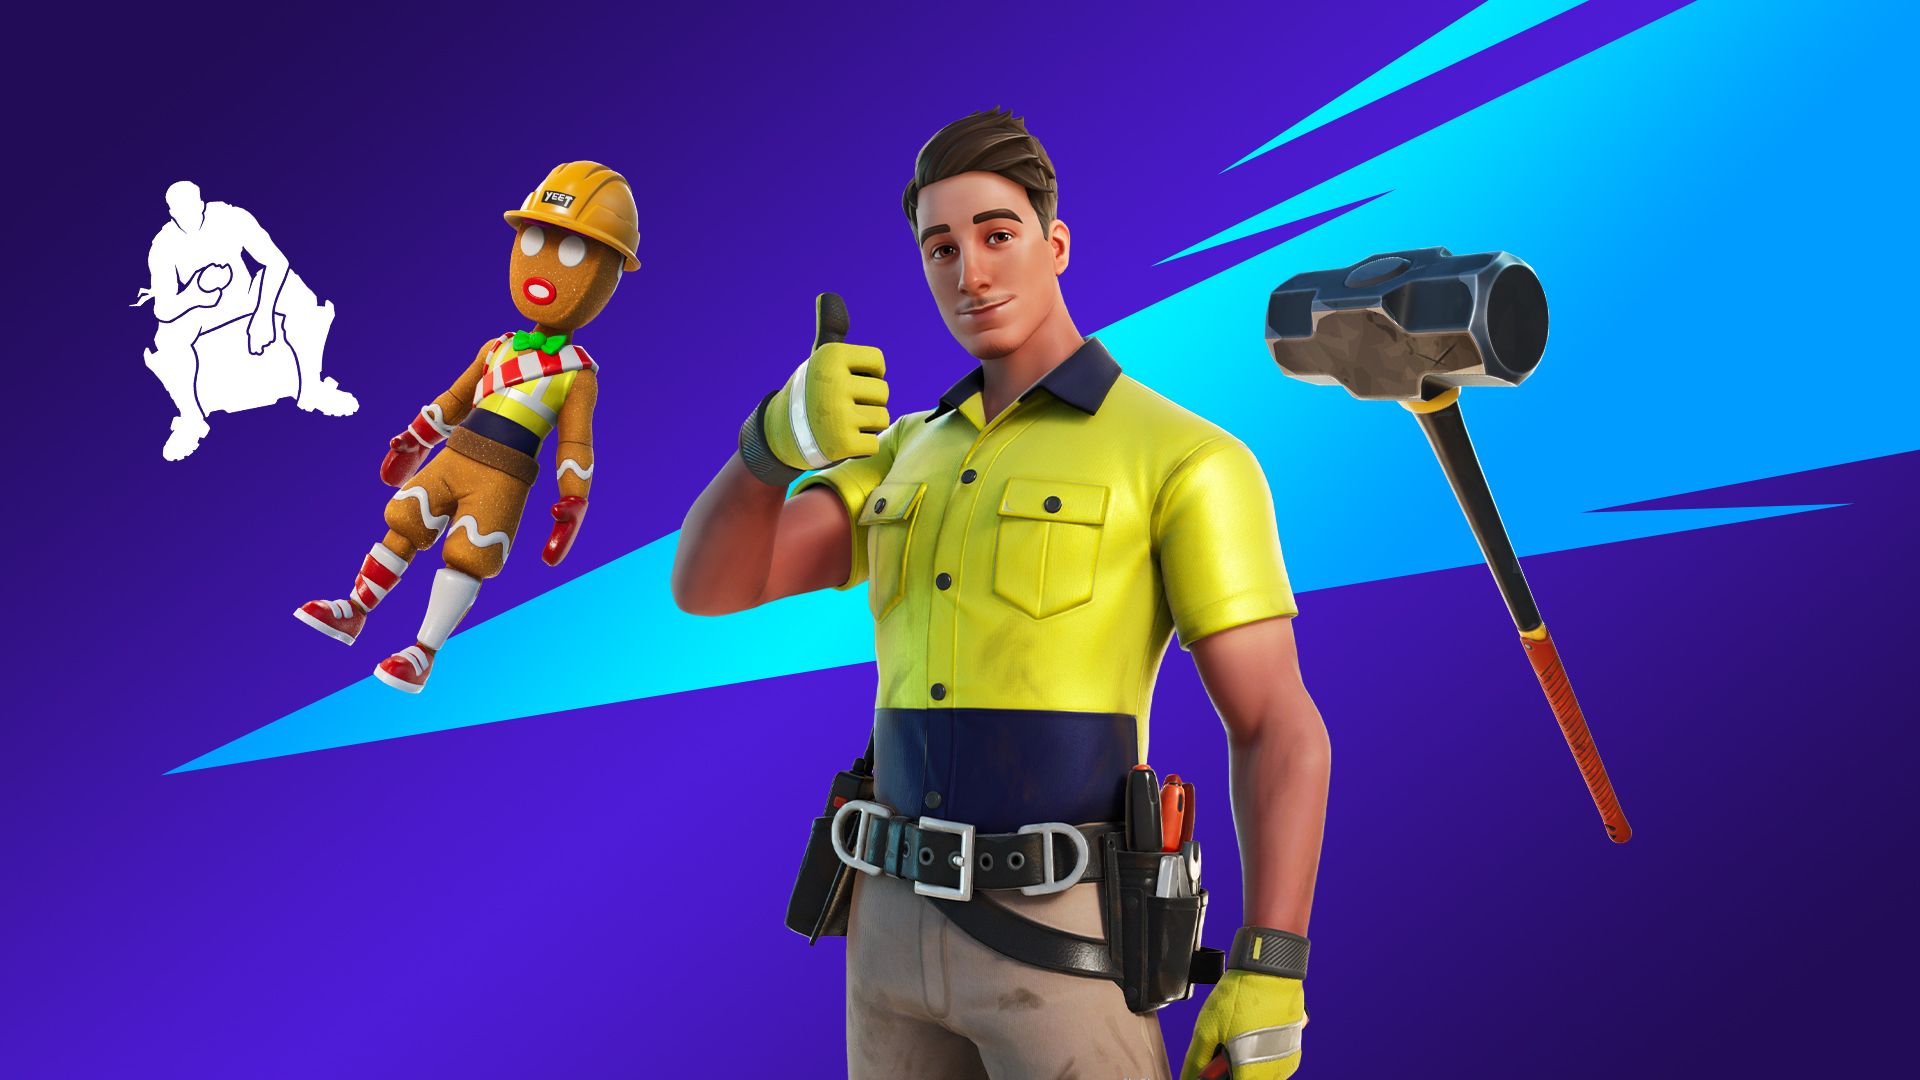 LazarBeam Fortnite Skin Revealed, Coming March 4